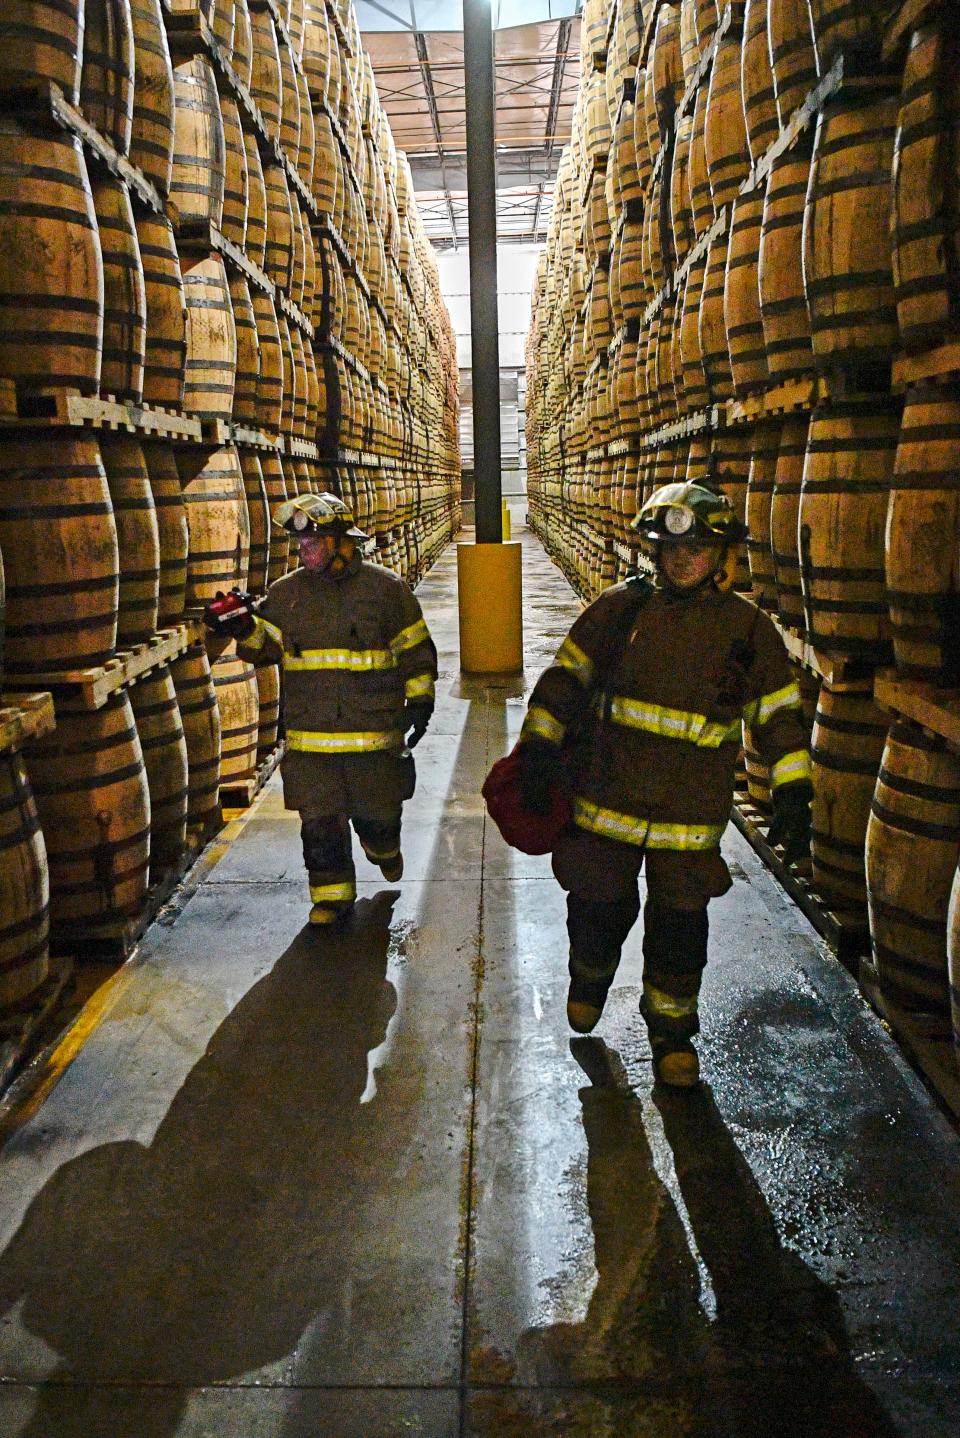 Caleb Barnett and Cody Cashion familiarize themselves with a barrelhouse during a Jack Daniel's Volunteer Fire Brigade training exercise Monday, July 22, 2019, in Lynchburg, Tenn.